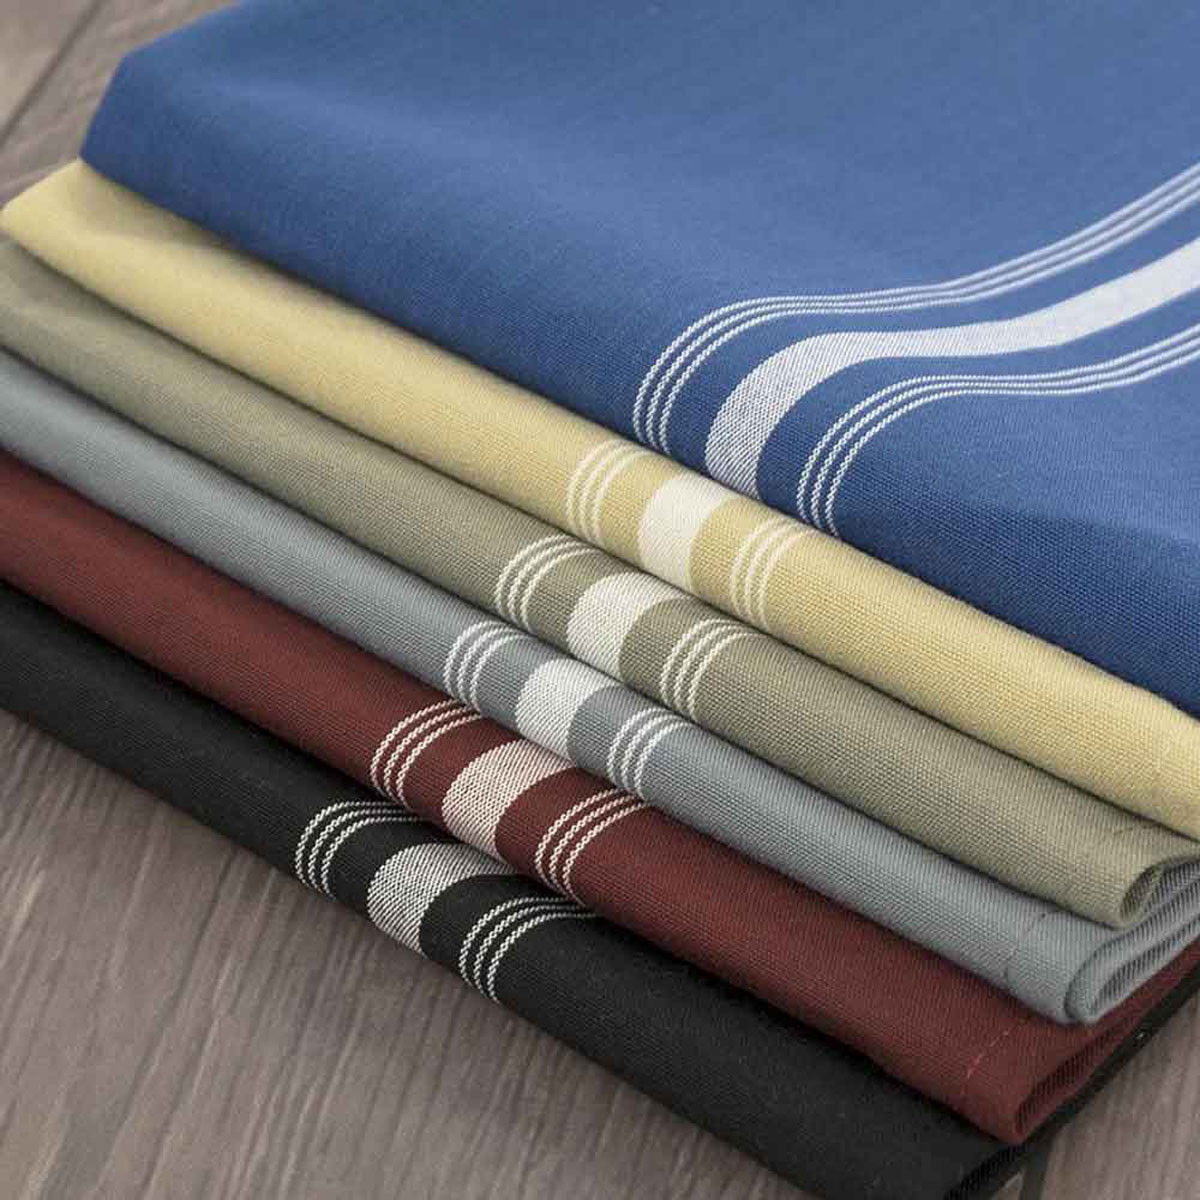 What material are these Premier Reverse Stripe Bistro napkins made of, and what are their notable qualities?